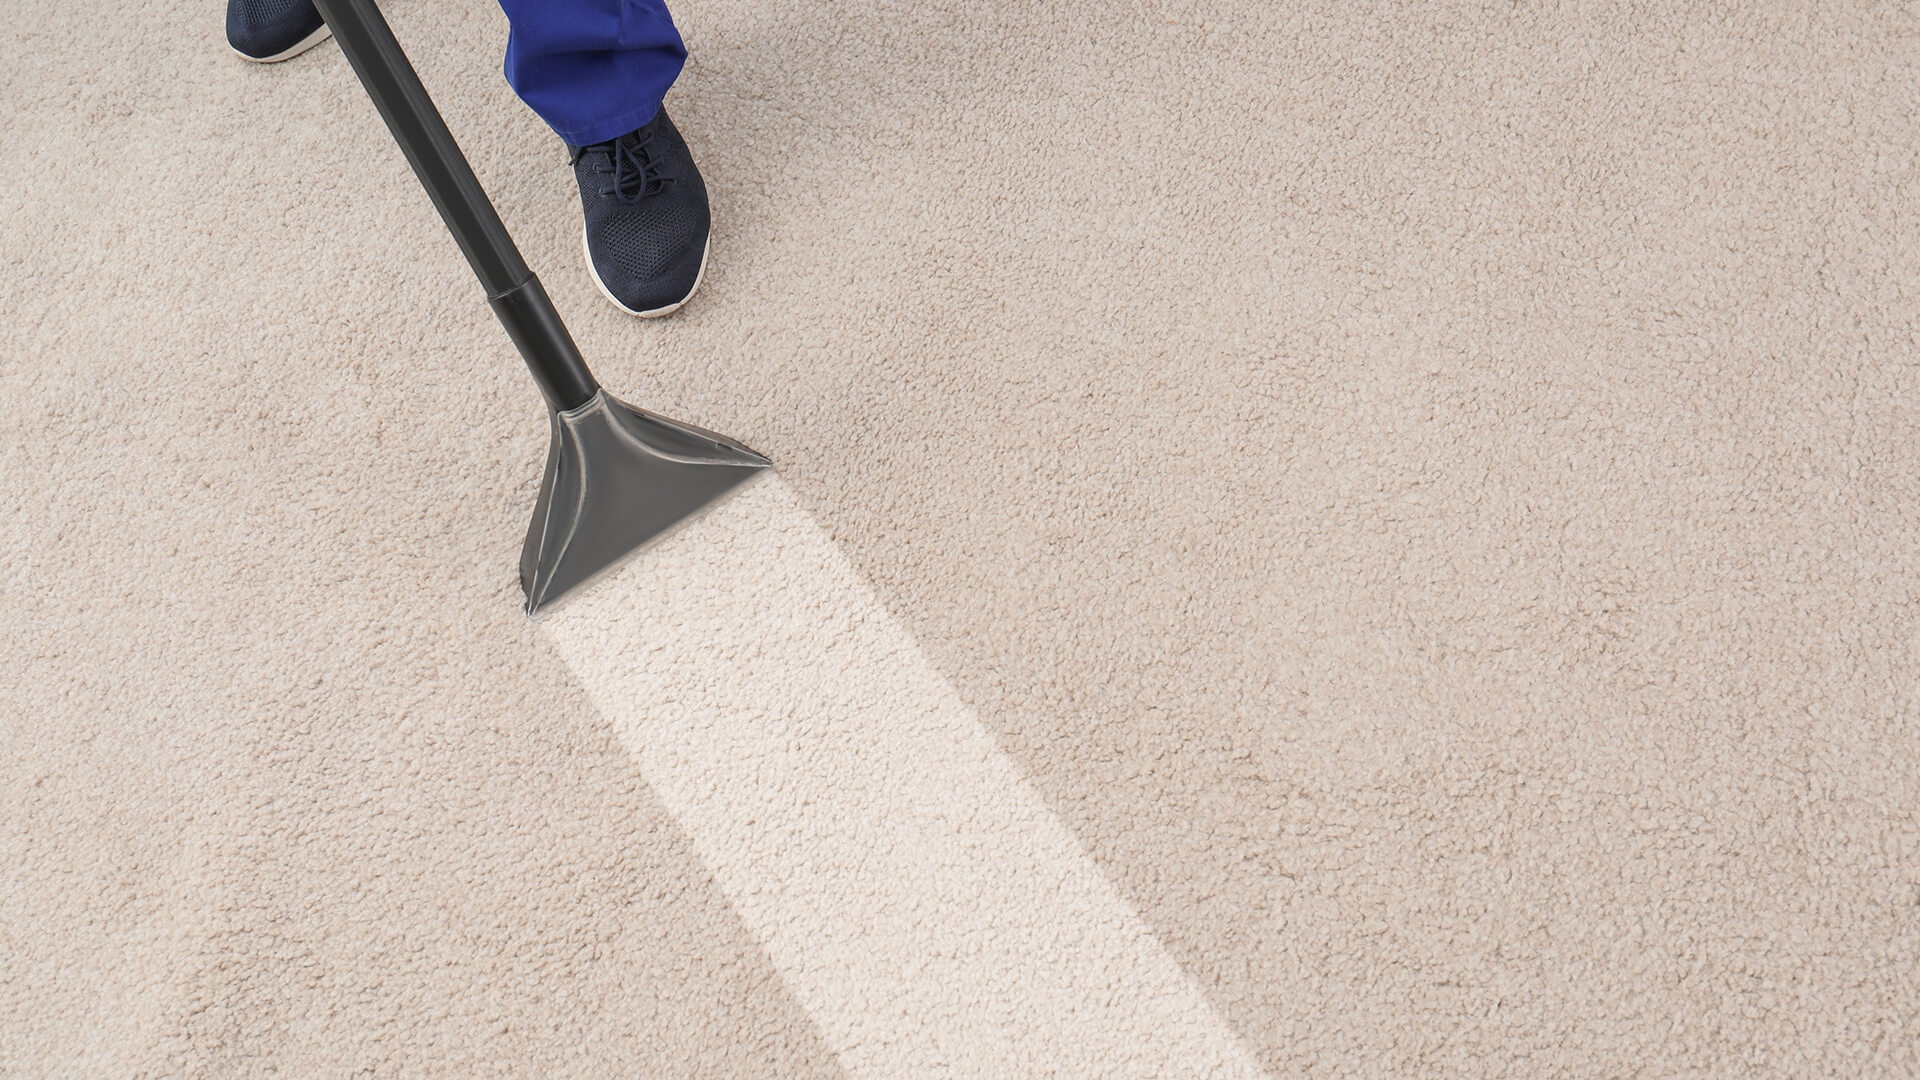 Carpet cleaning method - dry carpet cleaning